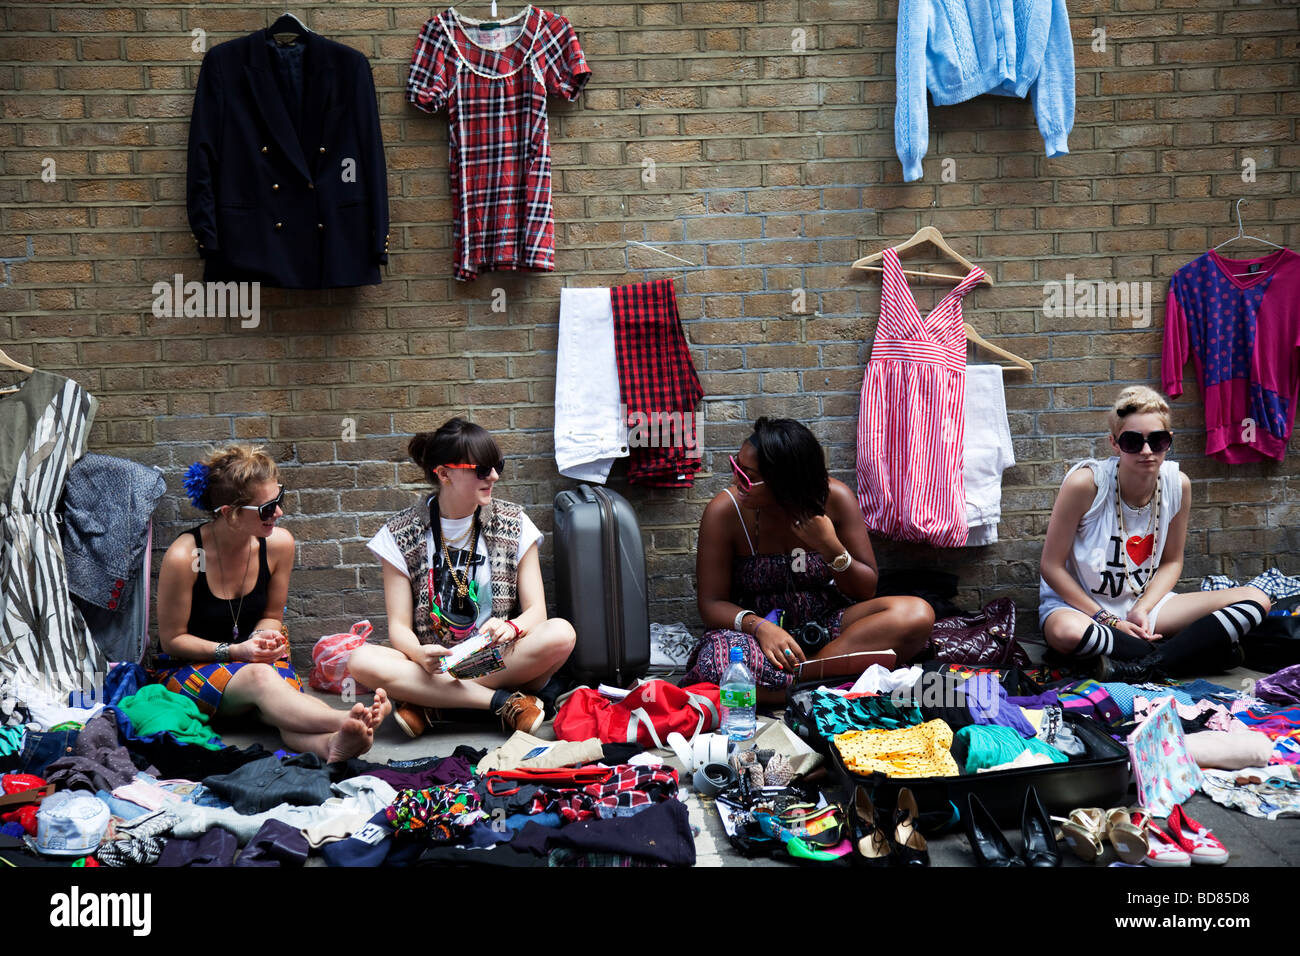 Sellers at Brick Lane for the Sunday Market. Many people come to sell their cast off clothes and belongings to raise some cash. Stock Photo